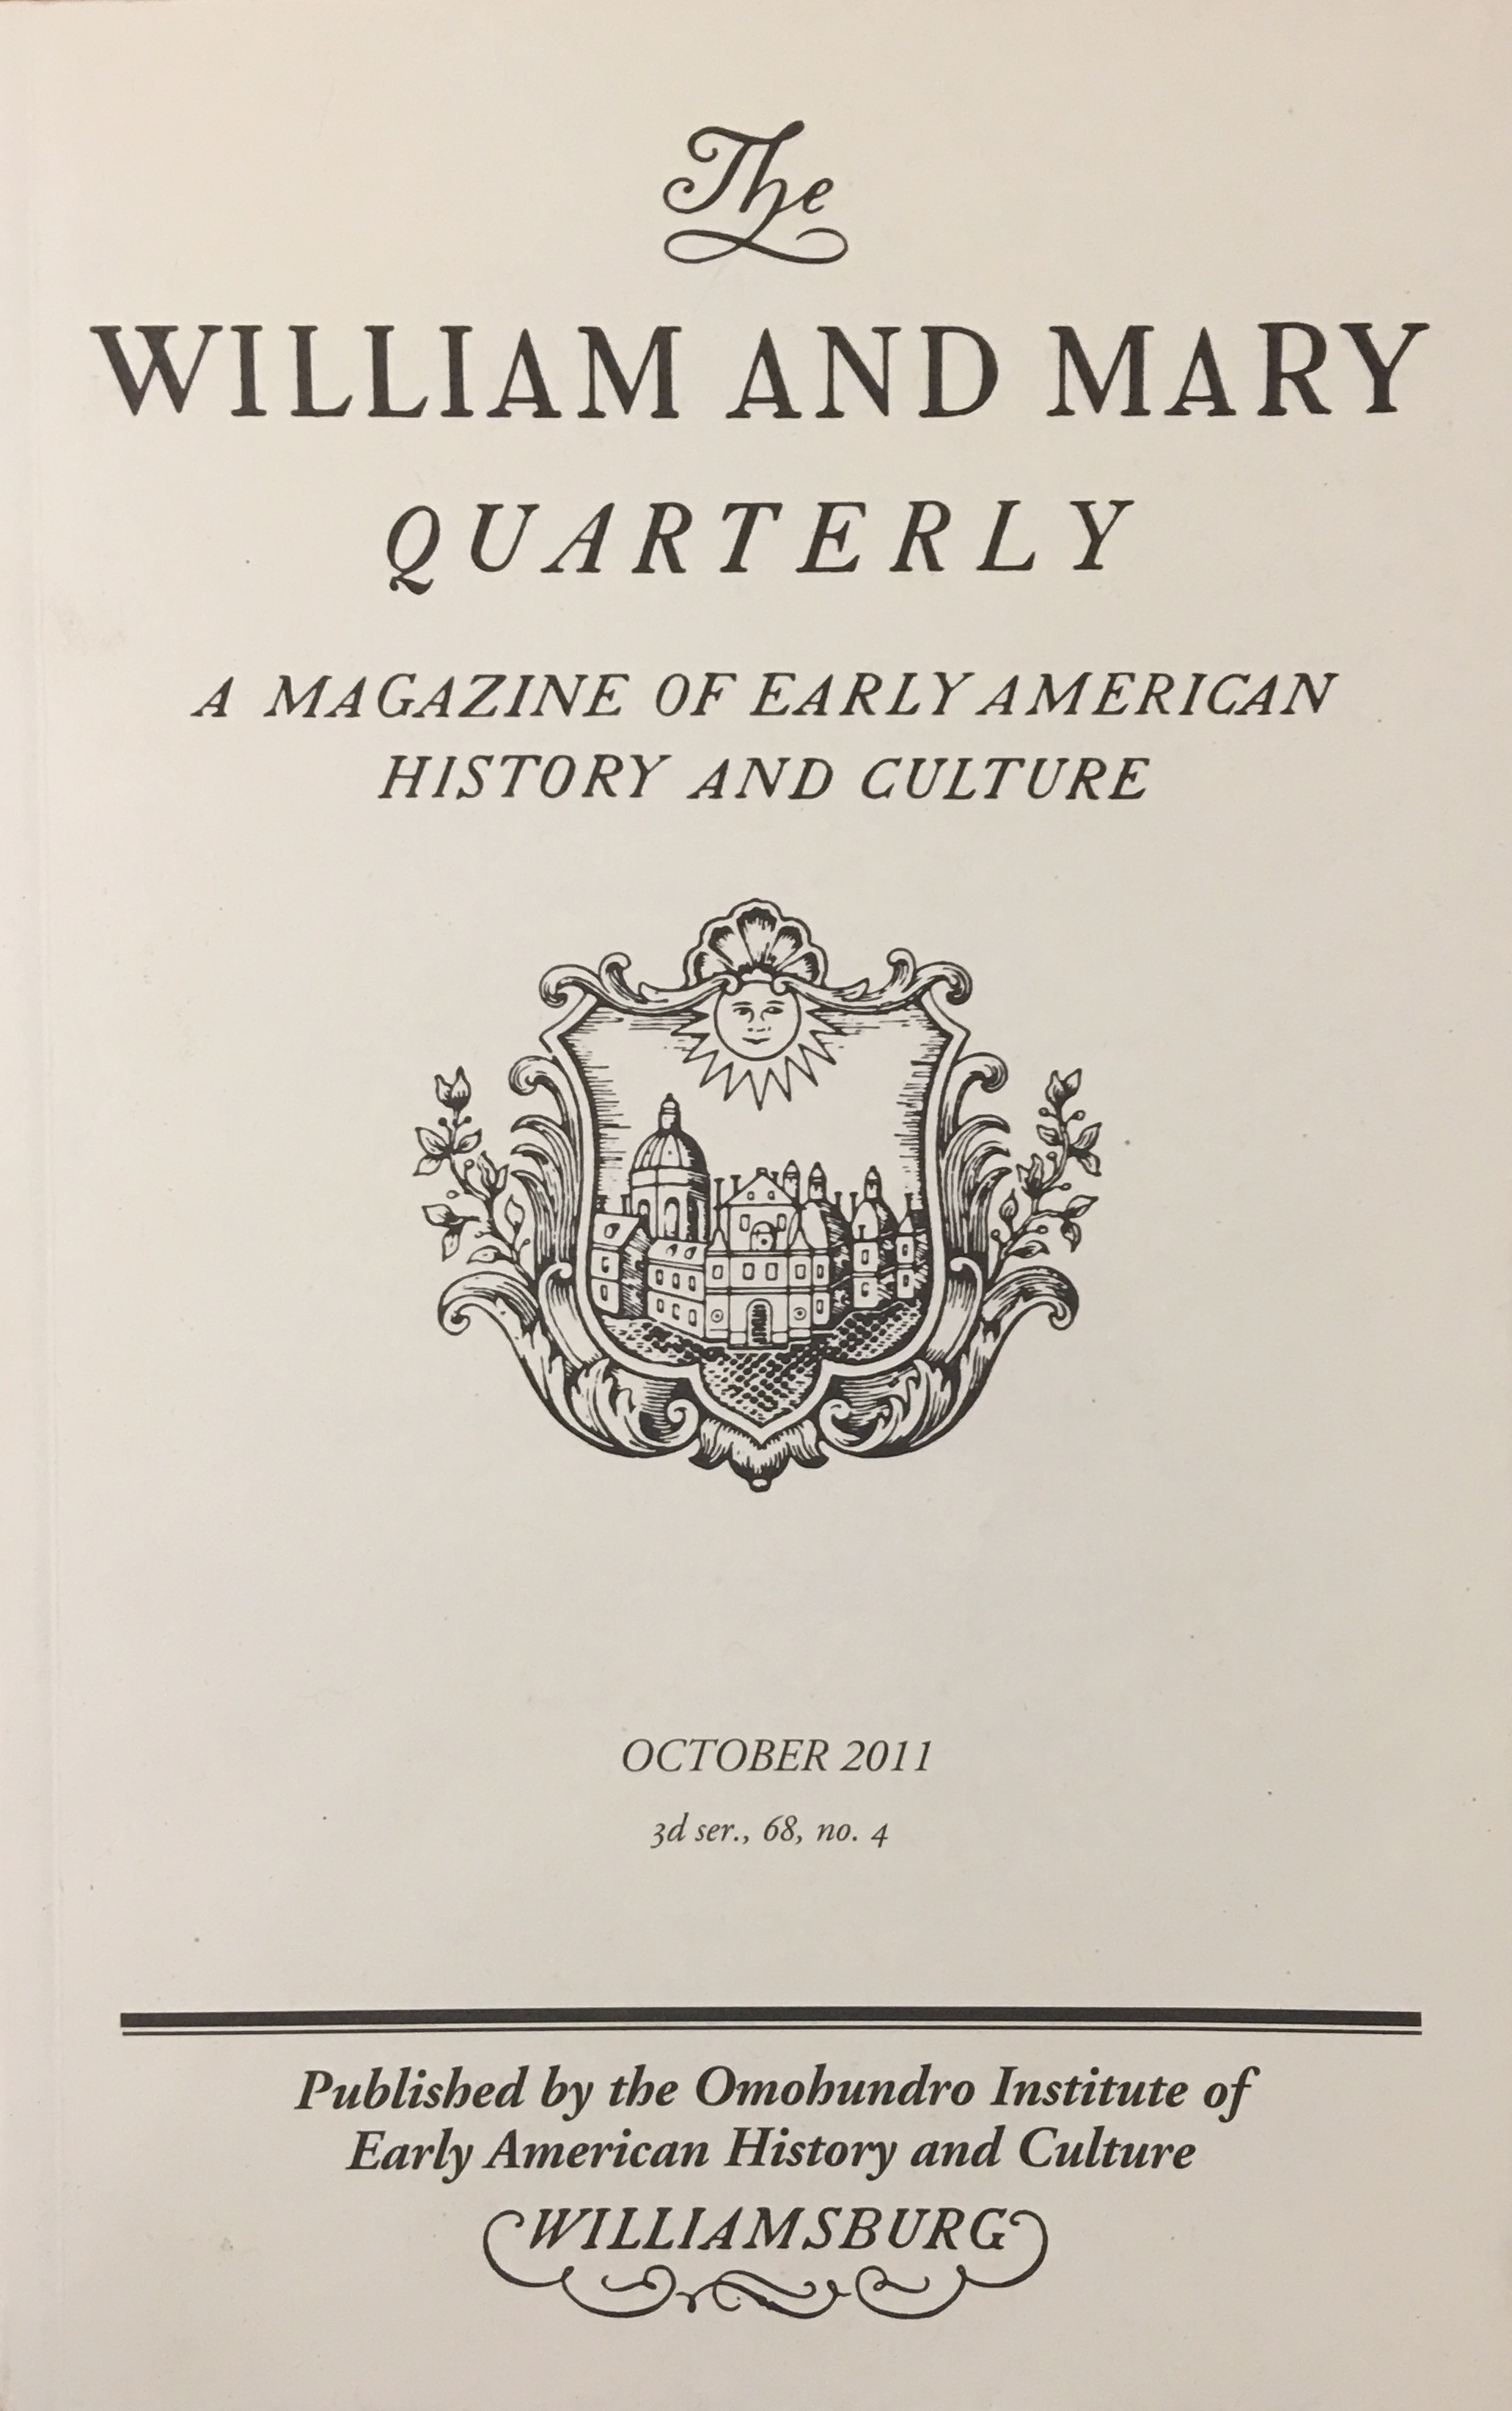 The William and Mary Quarterly — Michael McDonnell, Professor of Early American History pic